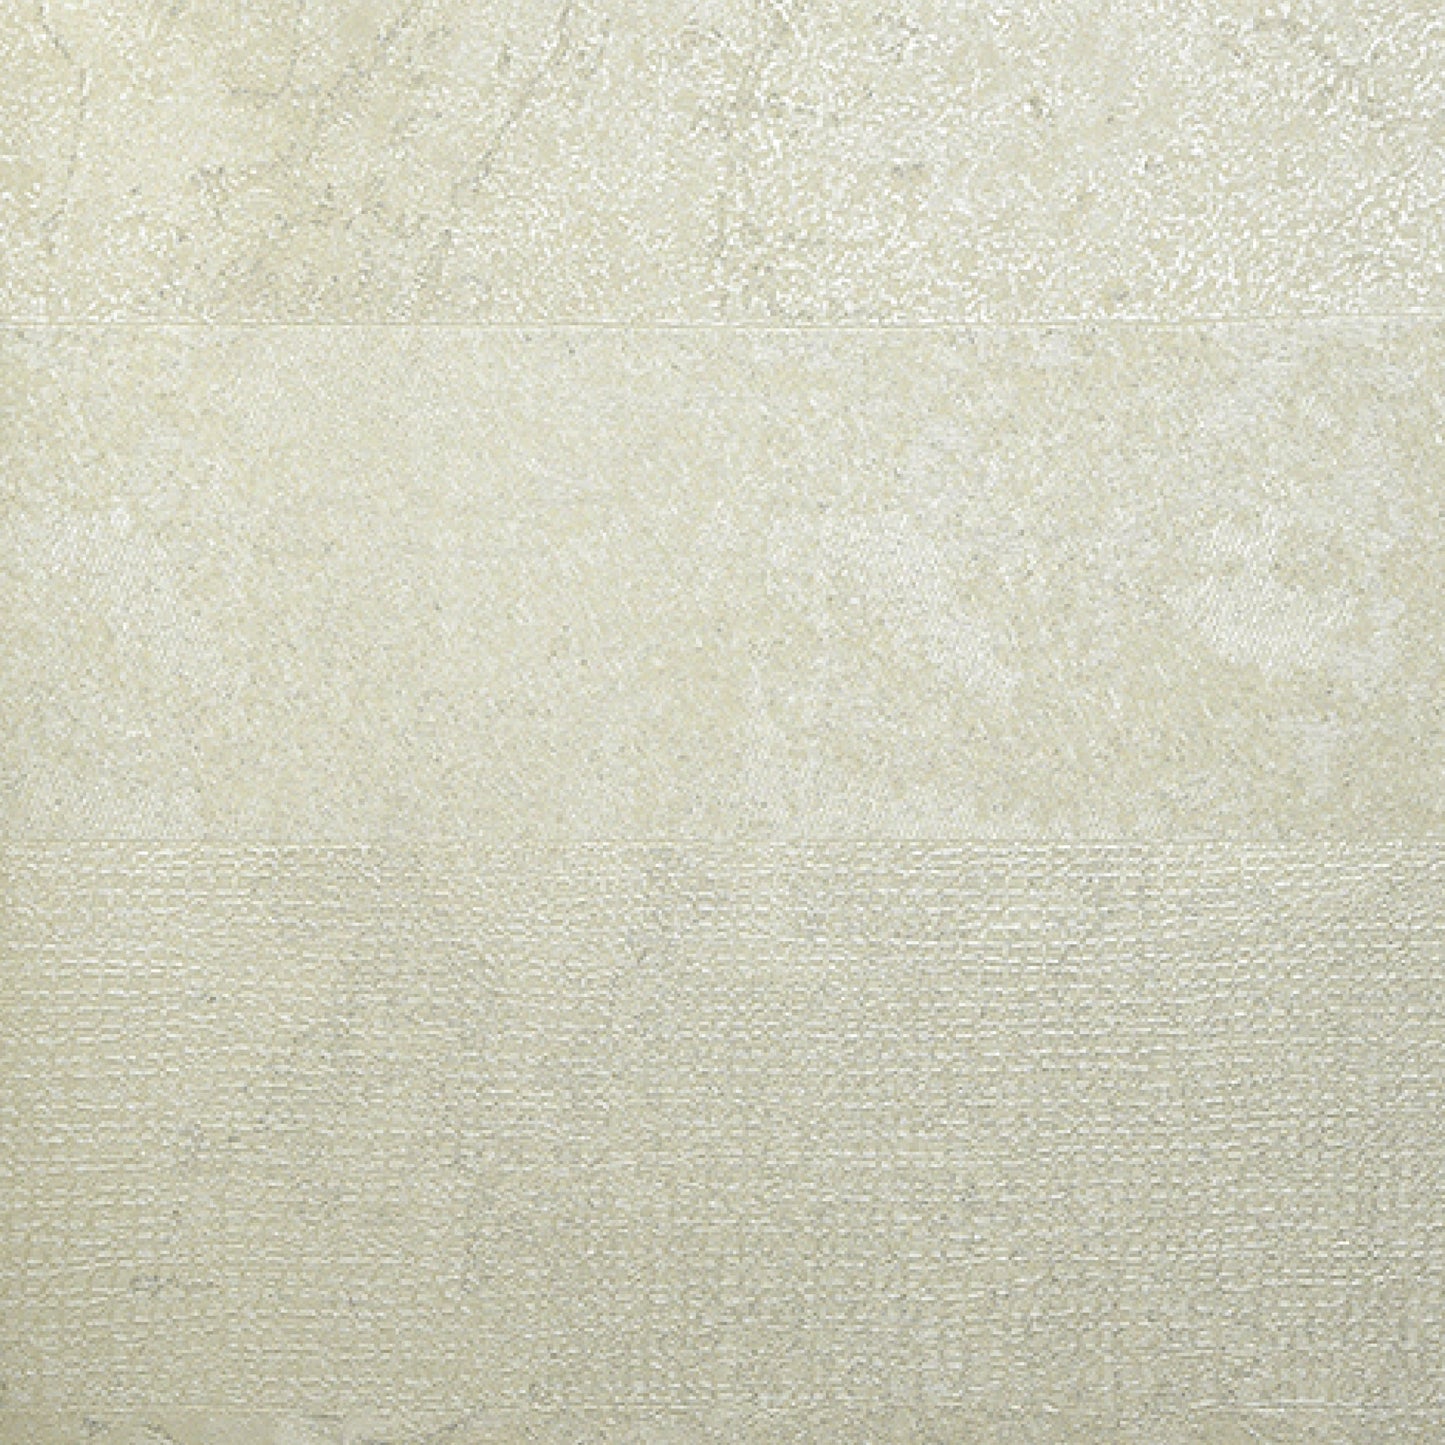 Neutral Nuance Grained Wallpaper